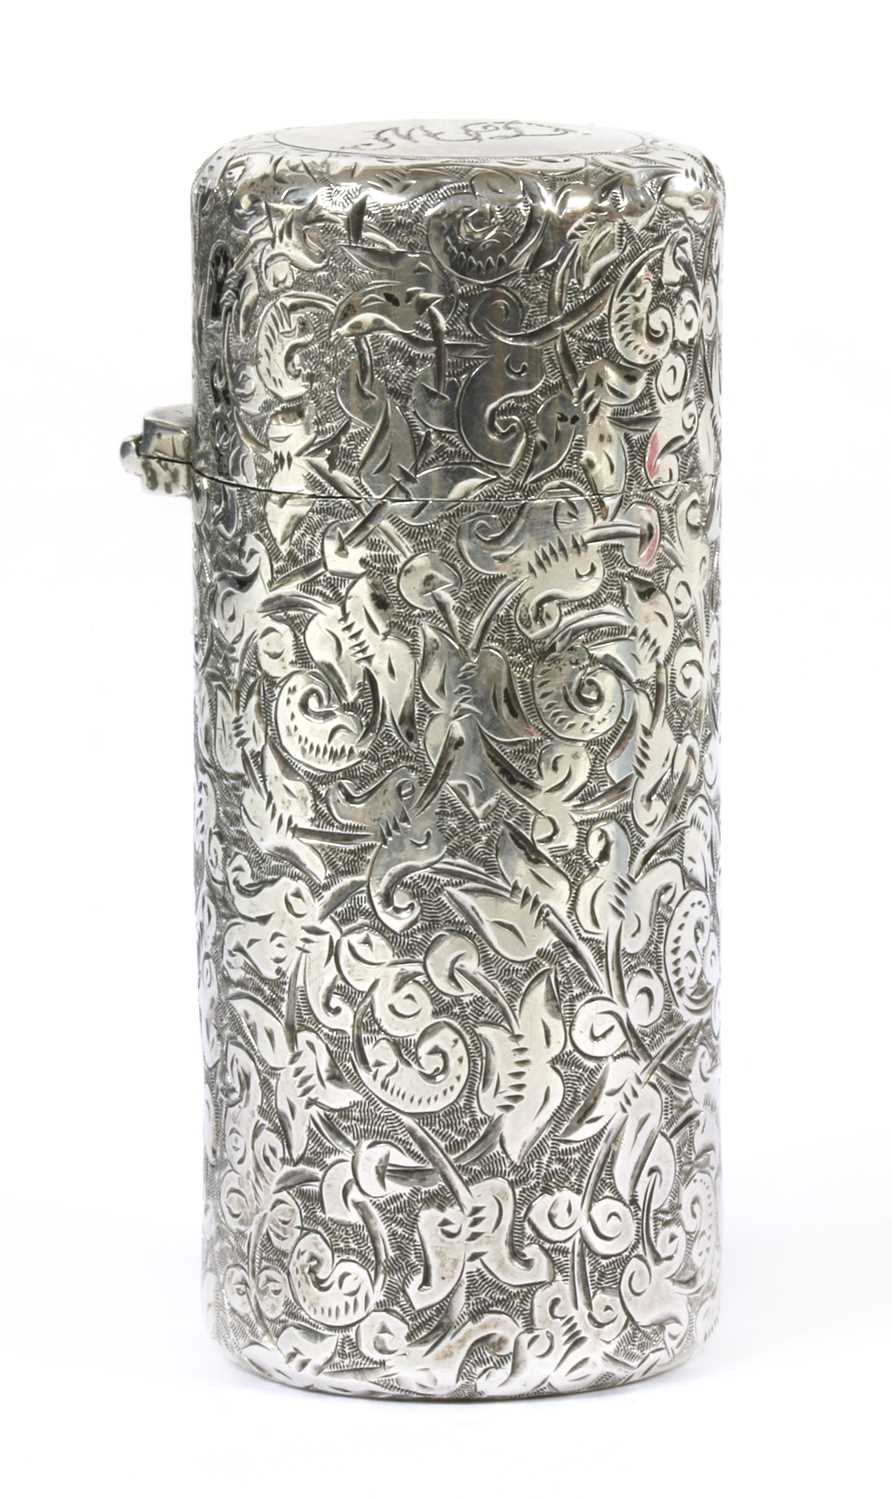 Lot 46 - A Victorian sterling silver cylindrical scent bottle, by Sampson Morden & Co